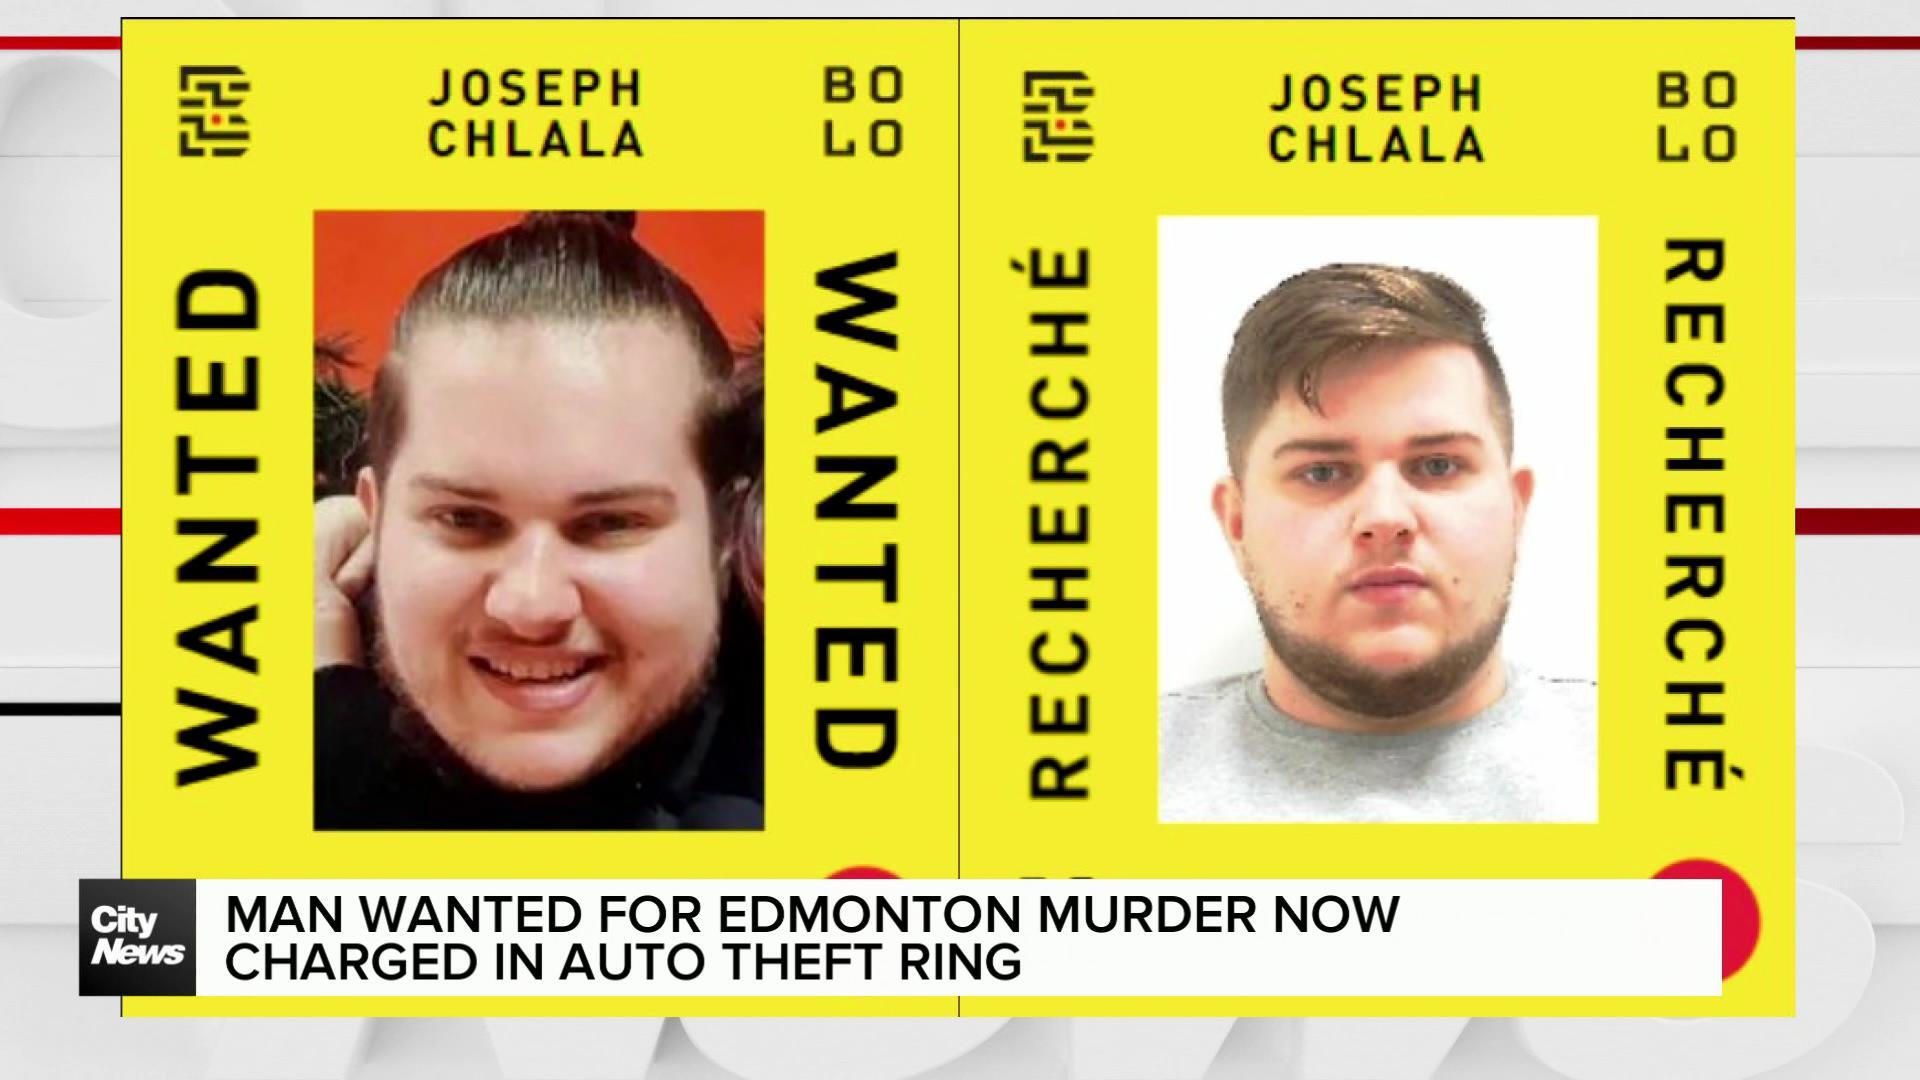 Man wanted for Edmonton murder charged in auto theft ring